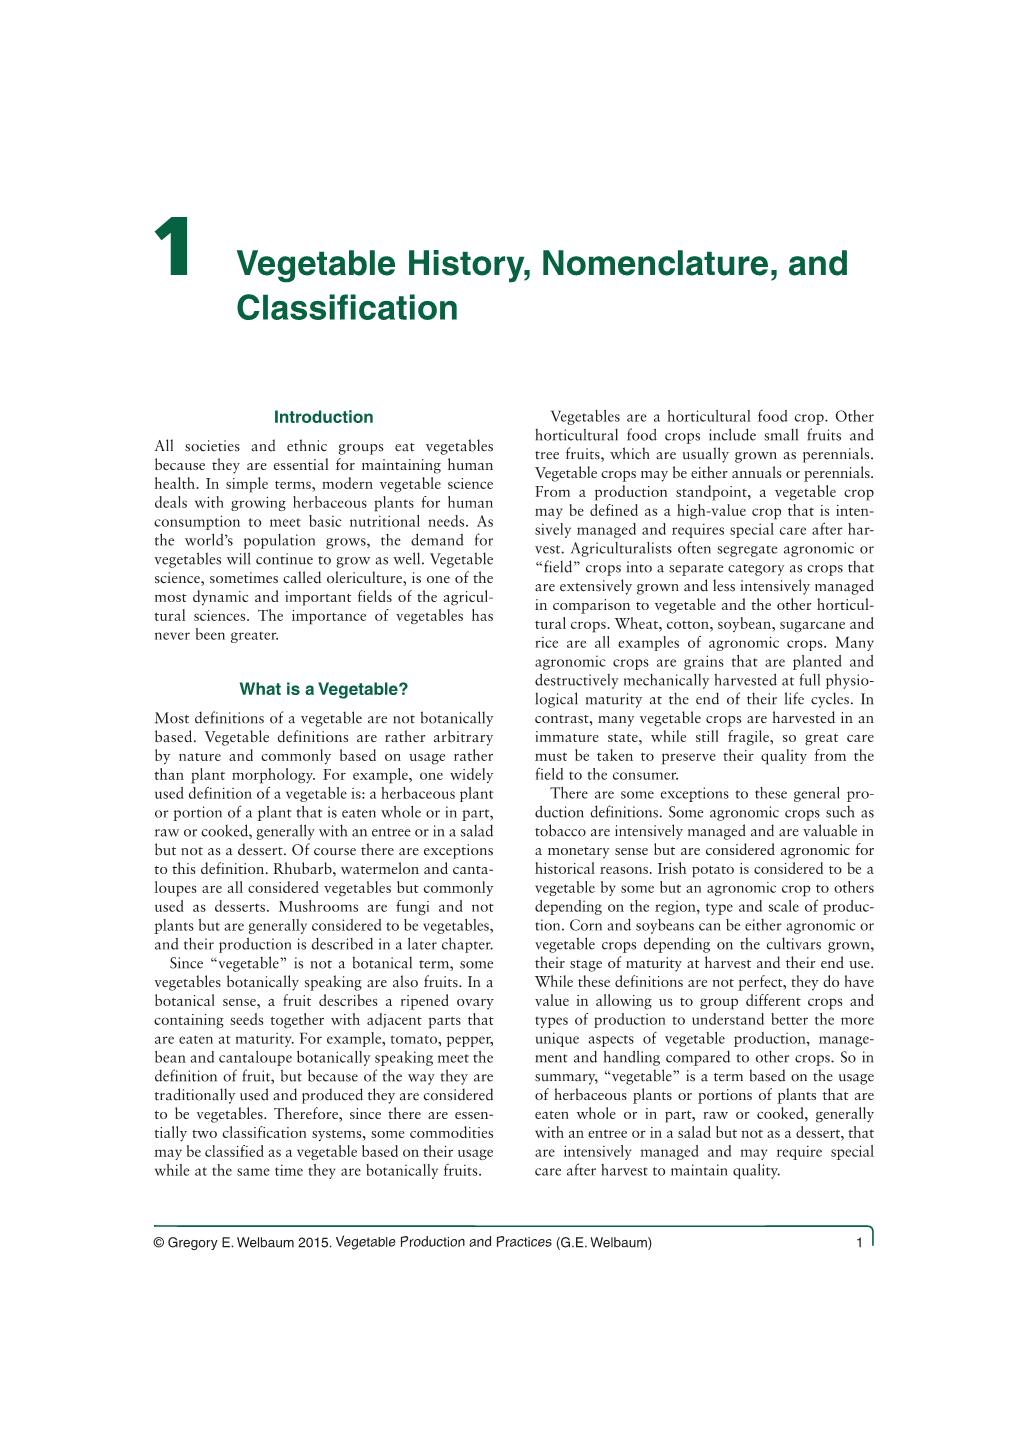 1 Vegetable History, Nomenclature, and Classification